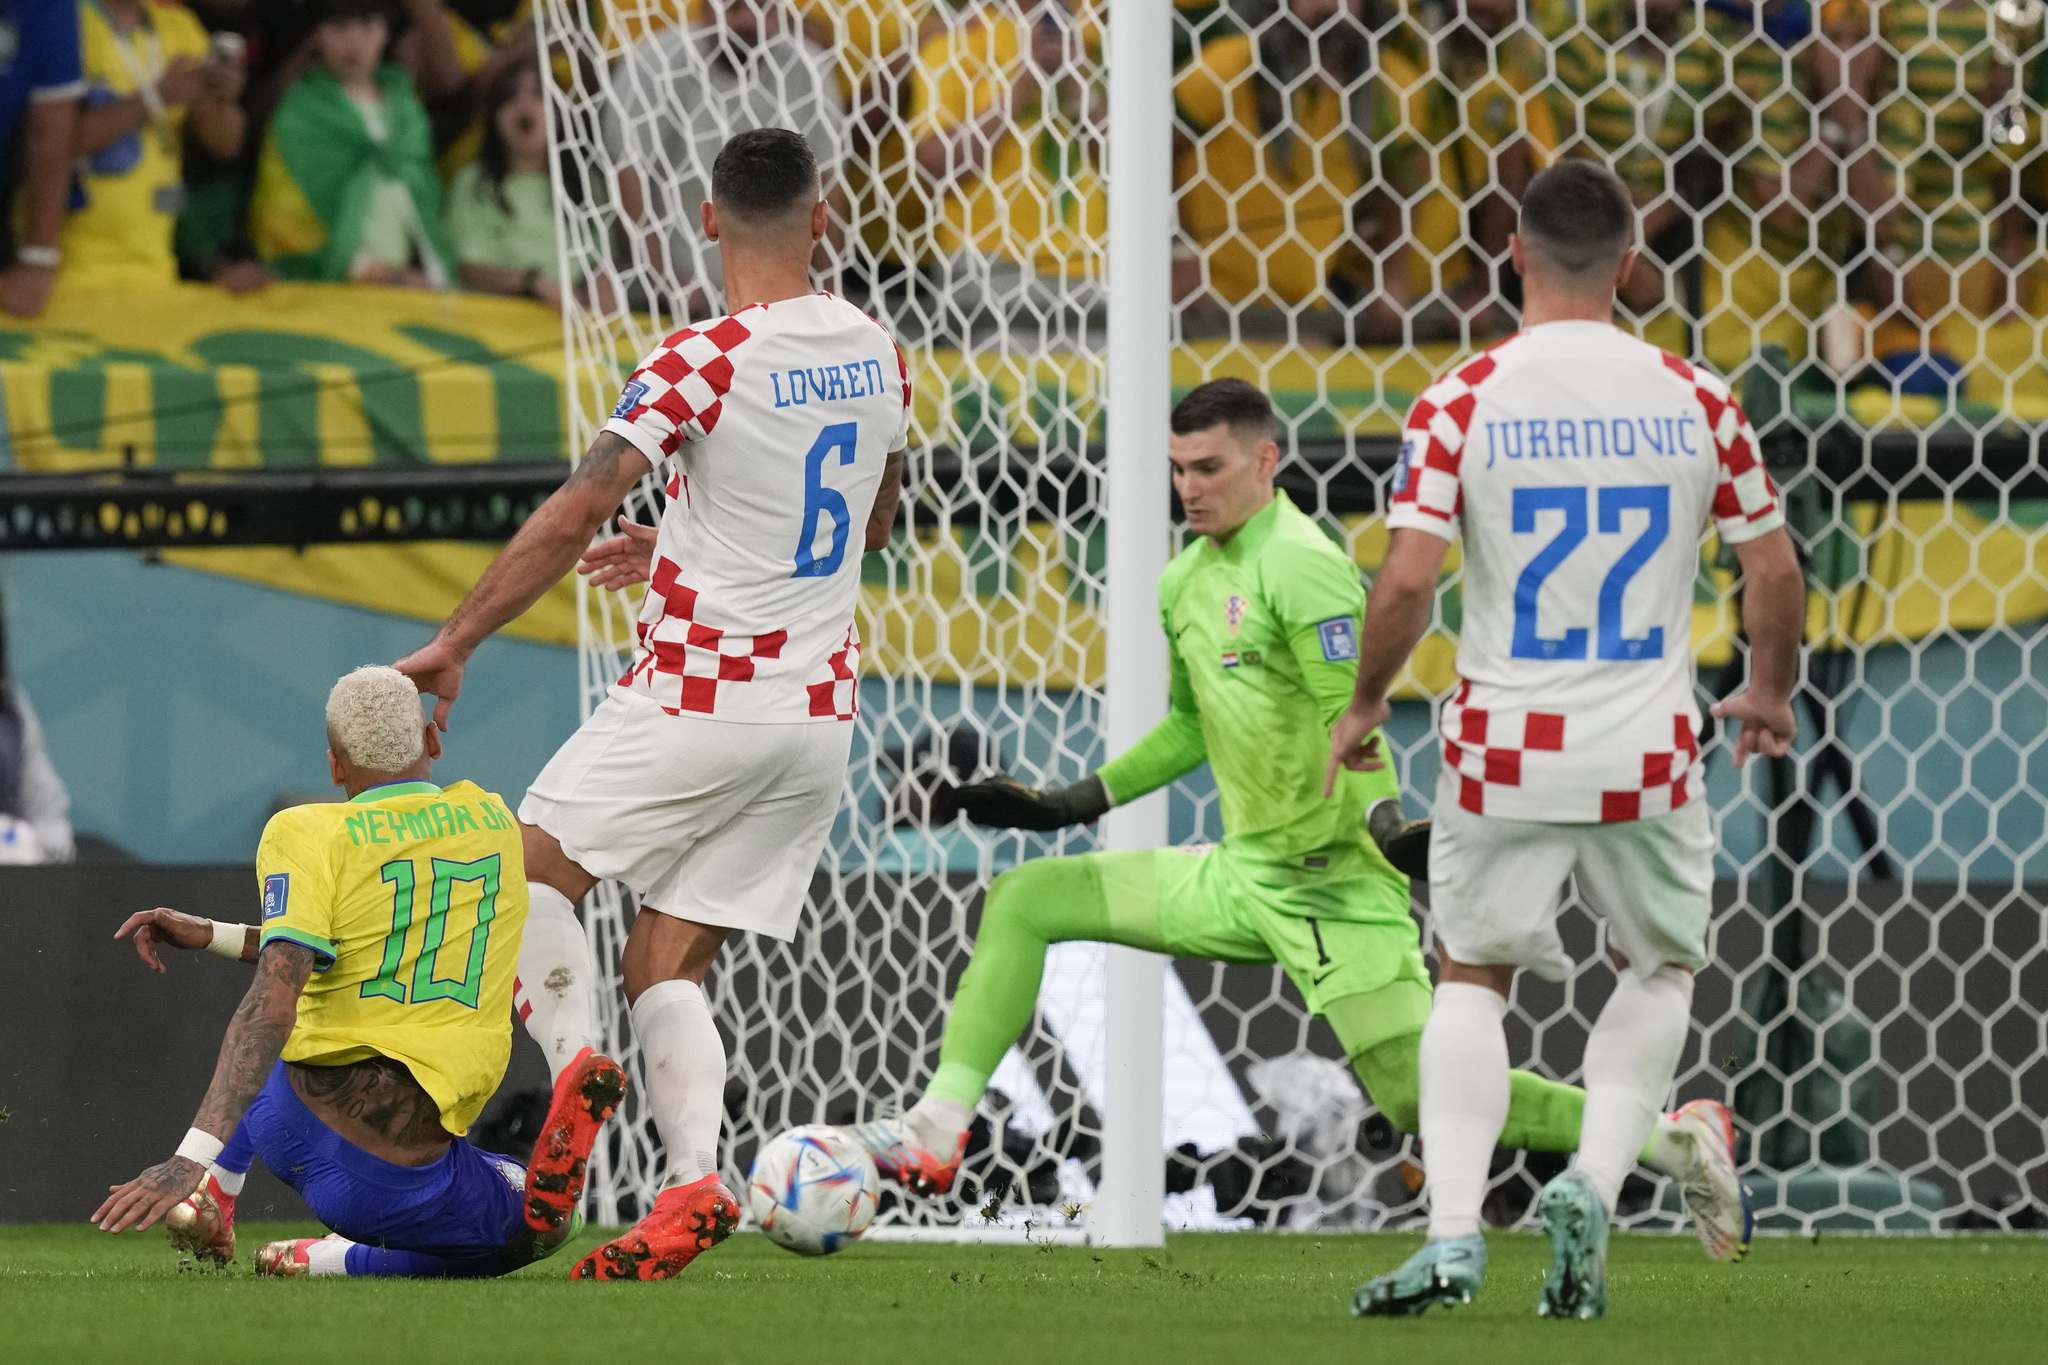 Croatia knocked Brazil out of the World Cup on penalties, with Dominik Livakovic proving to be the hero once more for the Vatreni